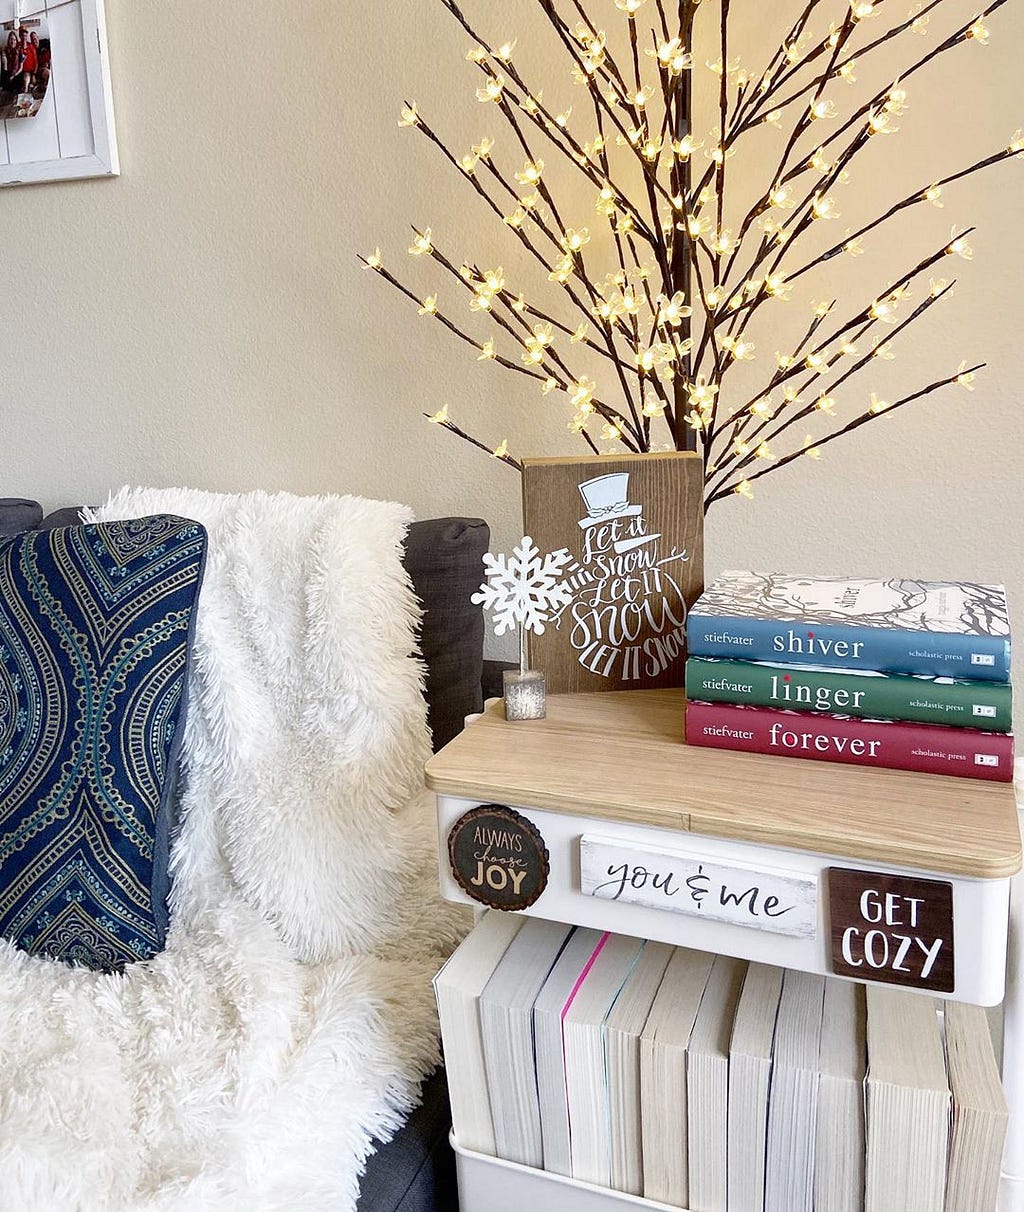 An accent chair with a white throw blanket and decorative pillow next to a cart with home decor accessories and books.